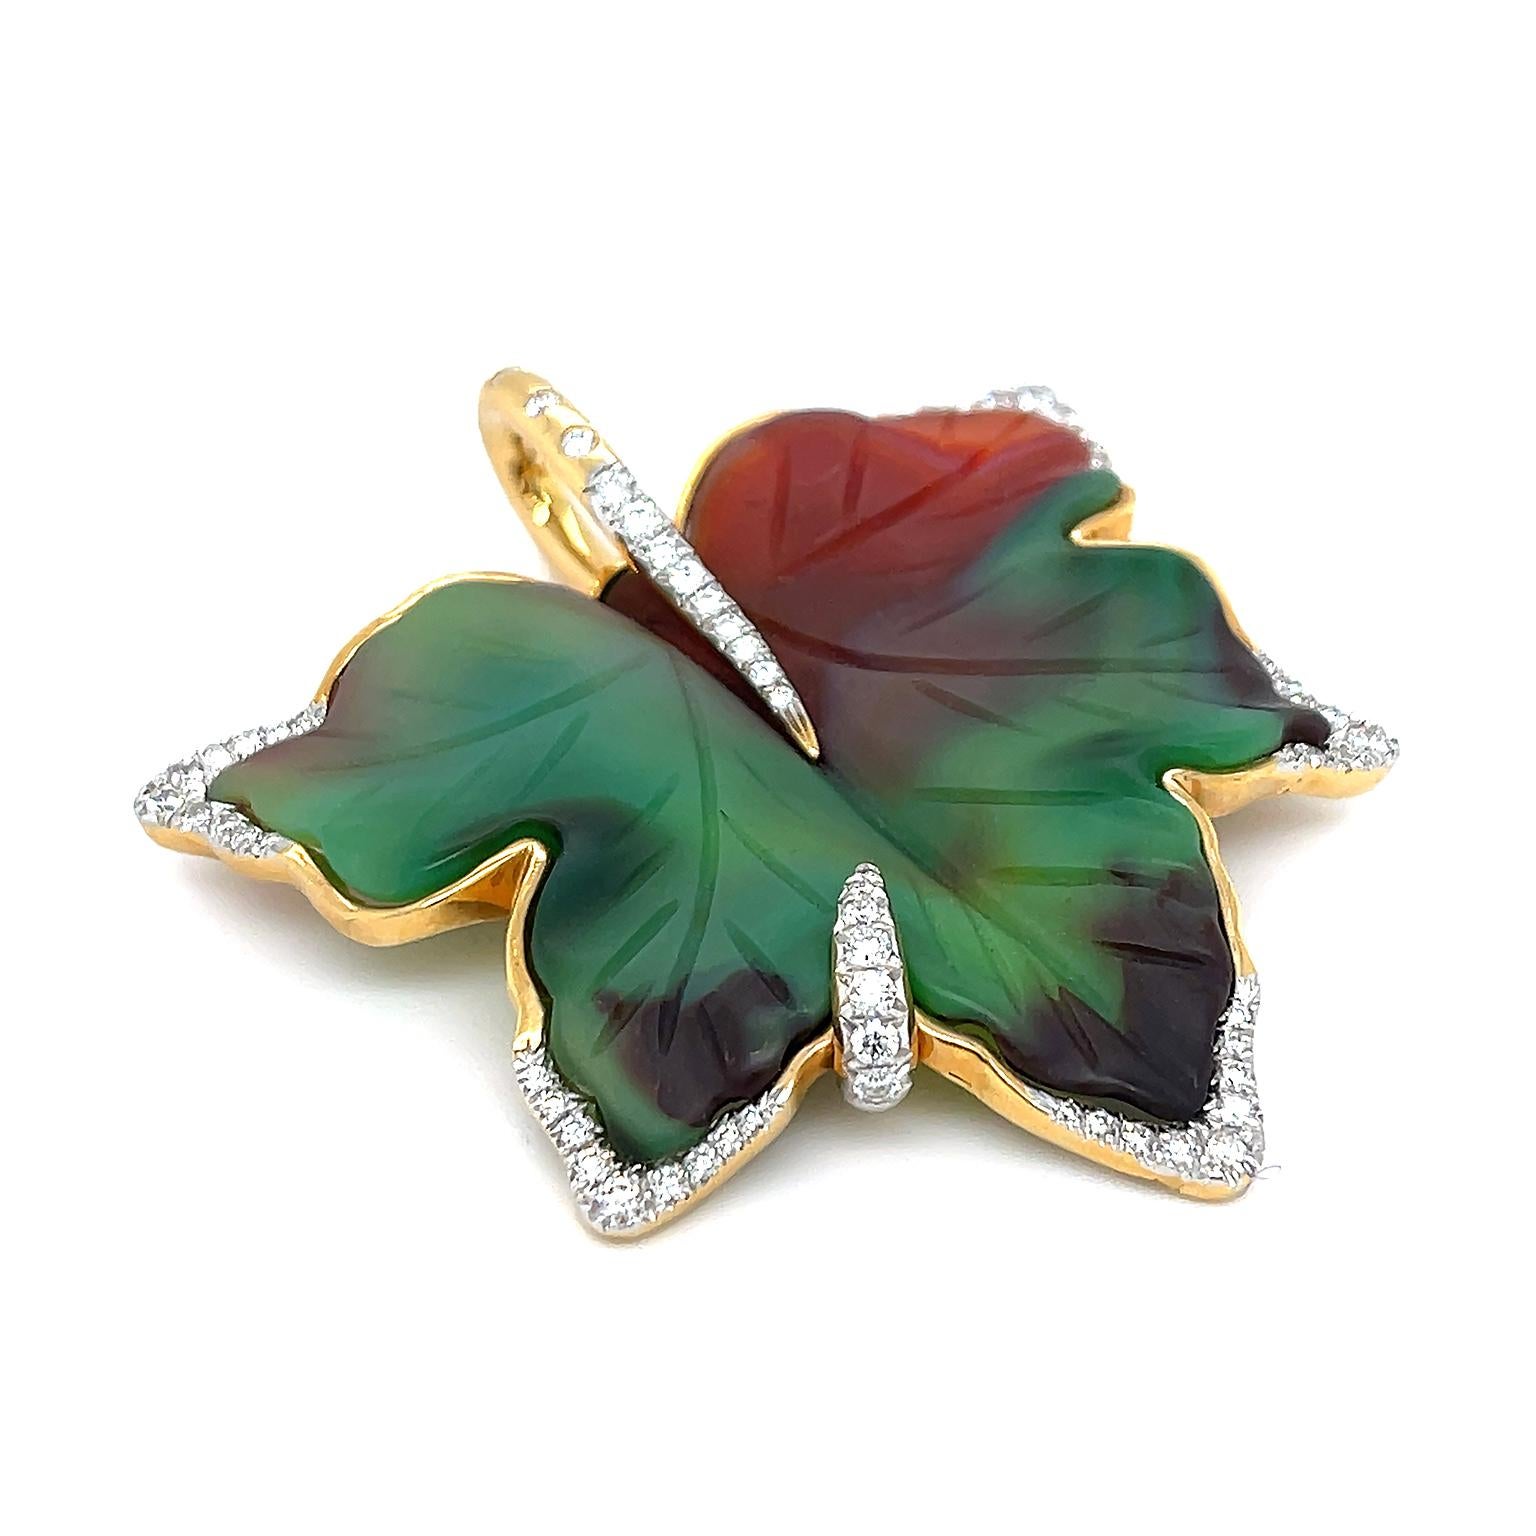 A deep earth toned agate is the focus of this leaf pendant trimmed with brilliant cut diamonds. Agate is carved in the contour of a five-pointed leaf, displaying the translucency of the gem, as shades of emerald and red brown blend into each other.